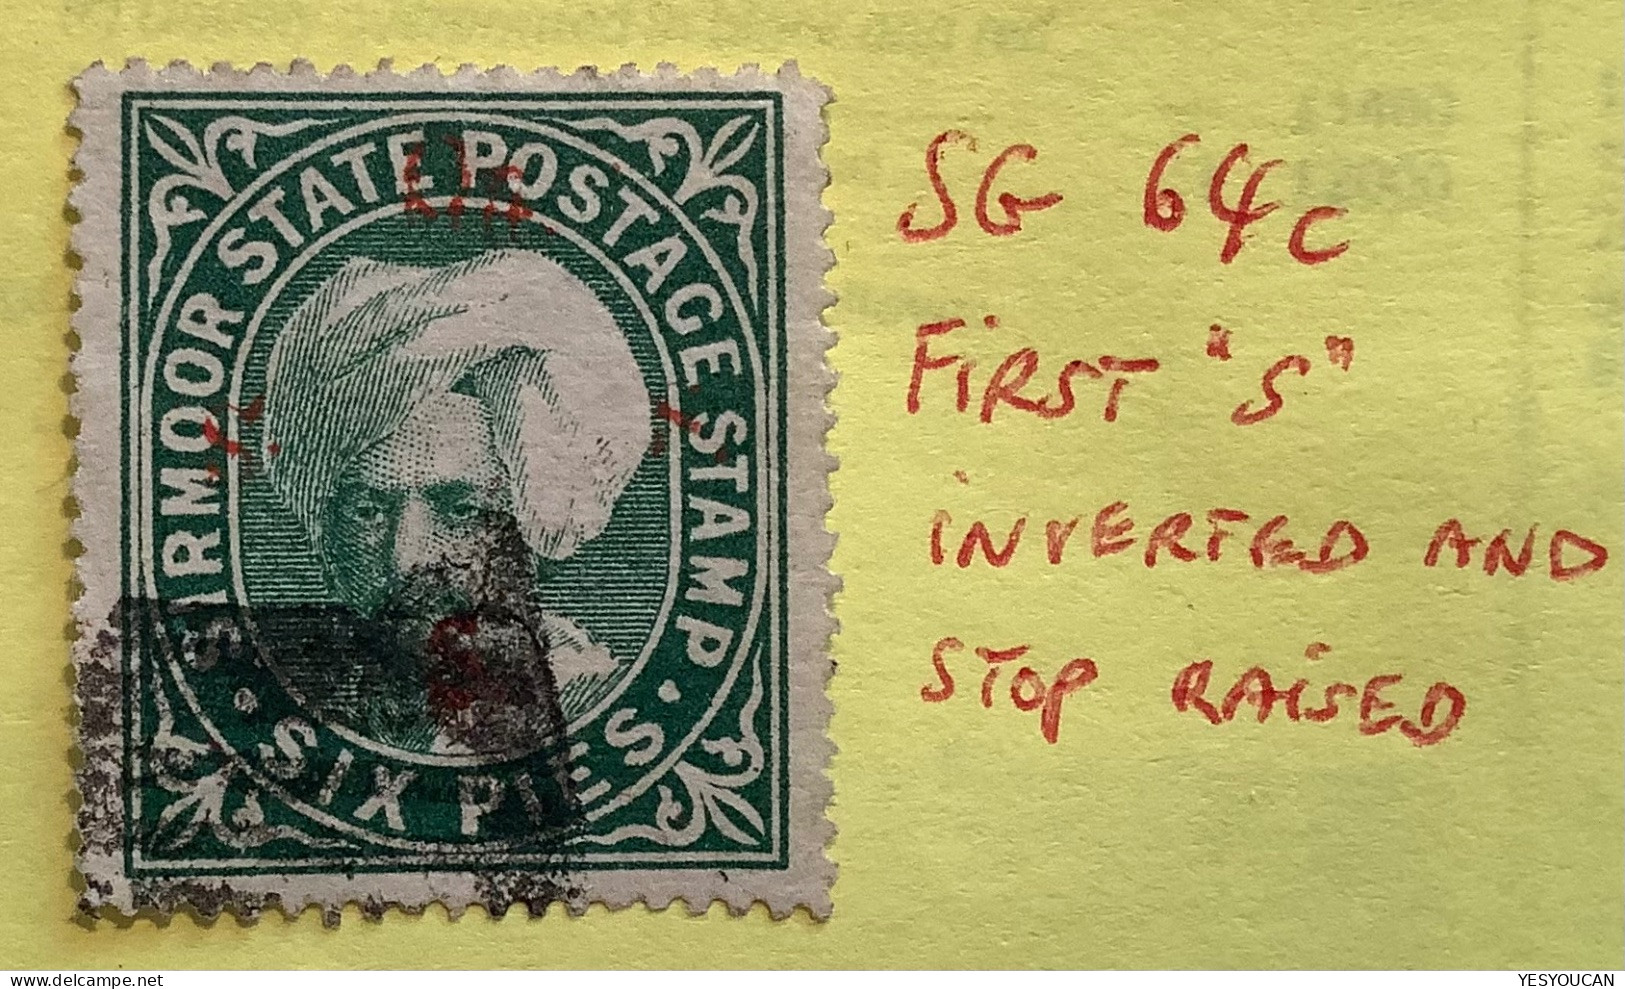 Sirmoor Official Stamps 1892-97 SCARCE VARIETY SG64c+58 6p Green (Inde Etats Princiers India Indian Feudatory States - Sirmur